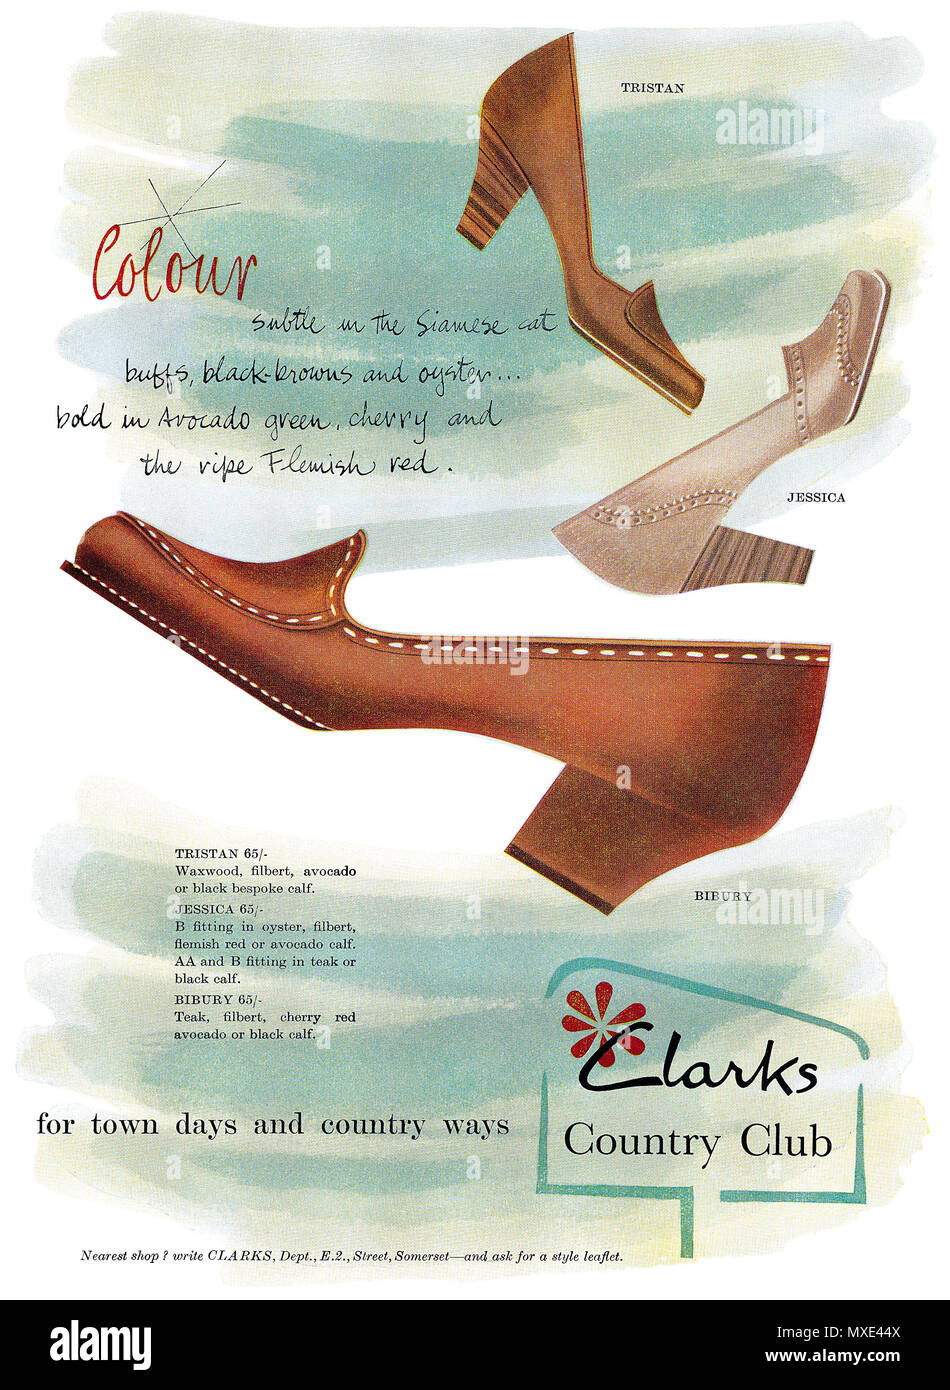 1955 British advertisement for Clarks shoes Stock Photo - Alamy